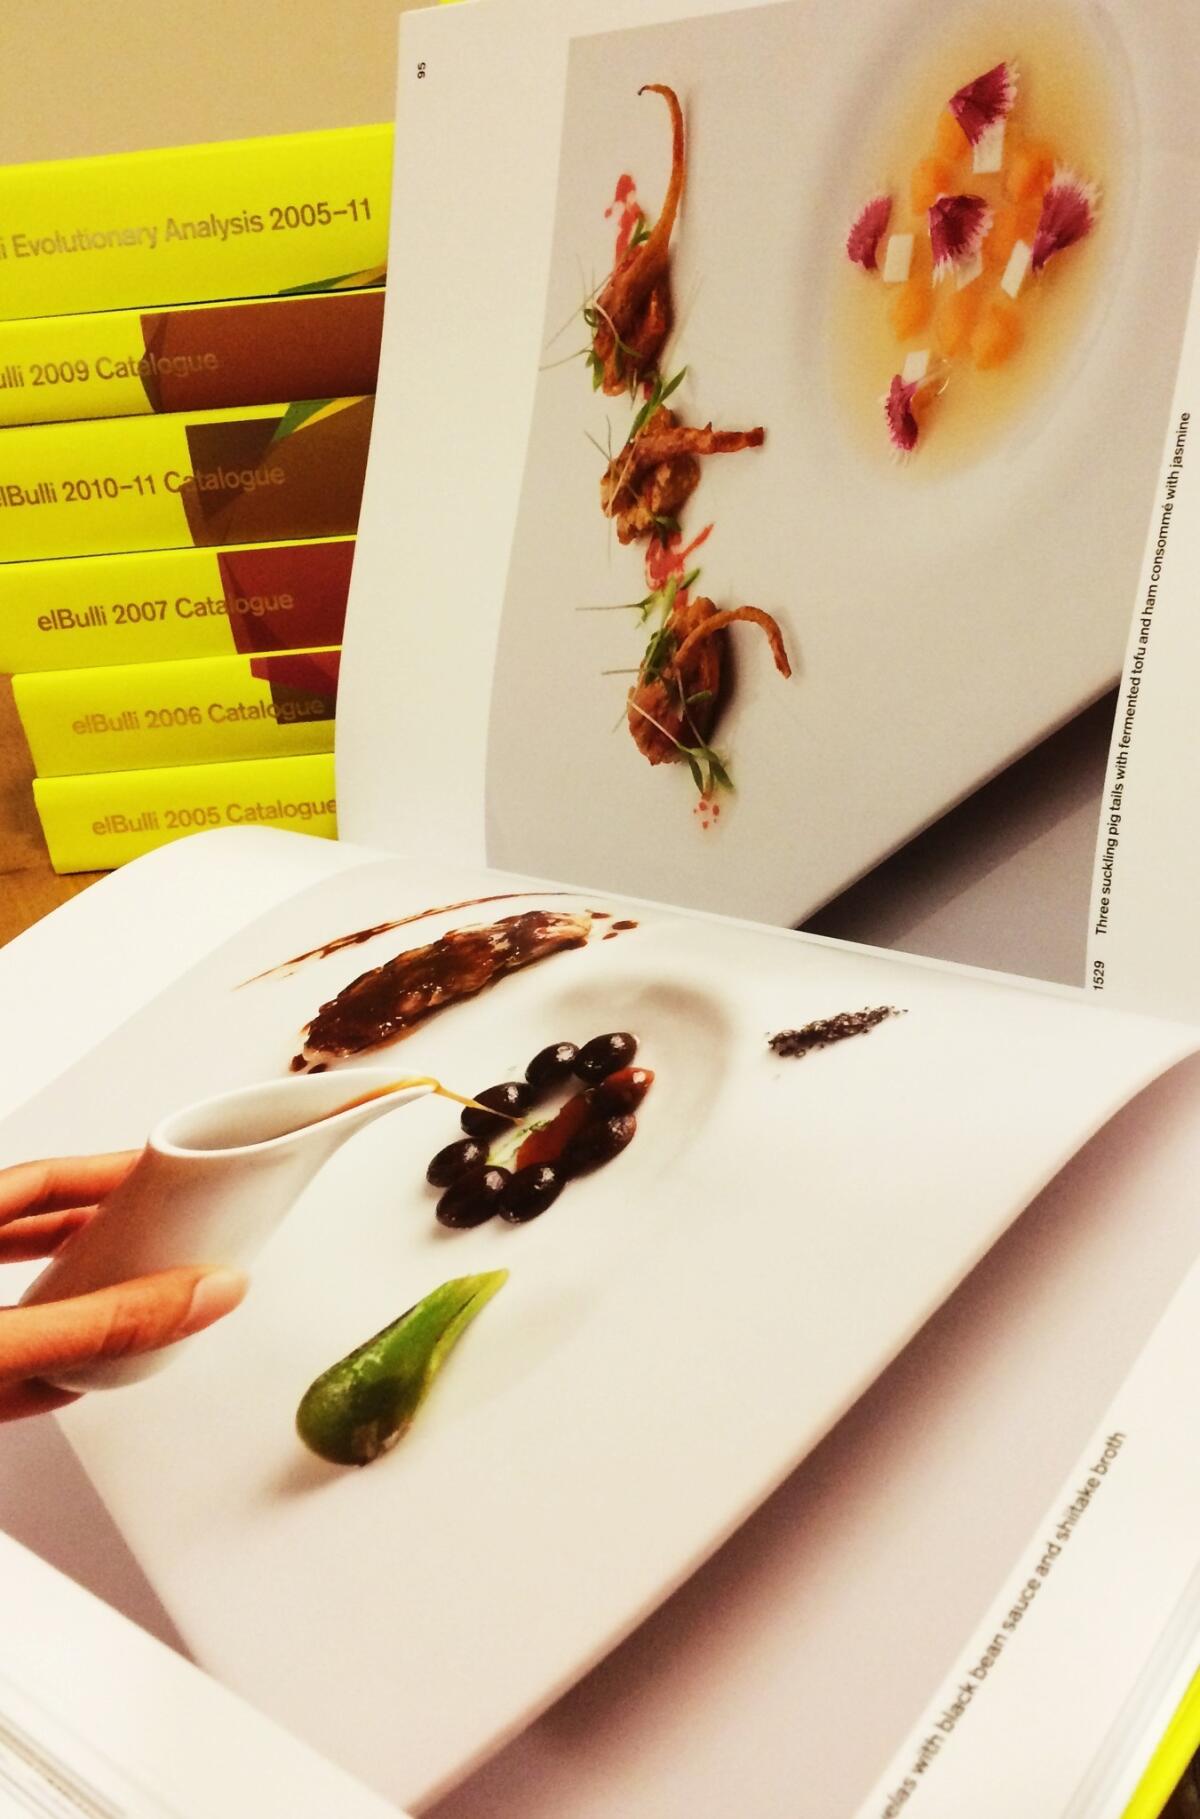 The seven-volume "El Bulli" box set is stunning, if daunting for a home chef.